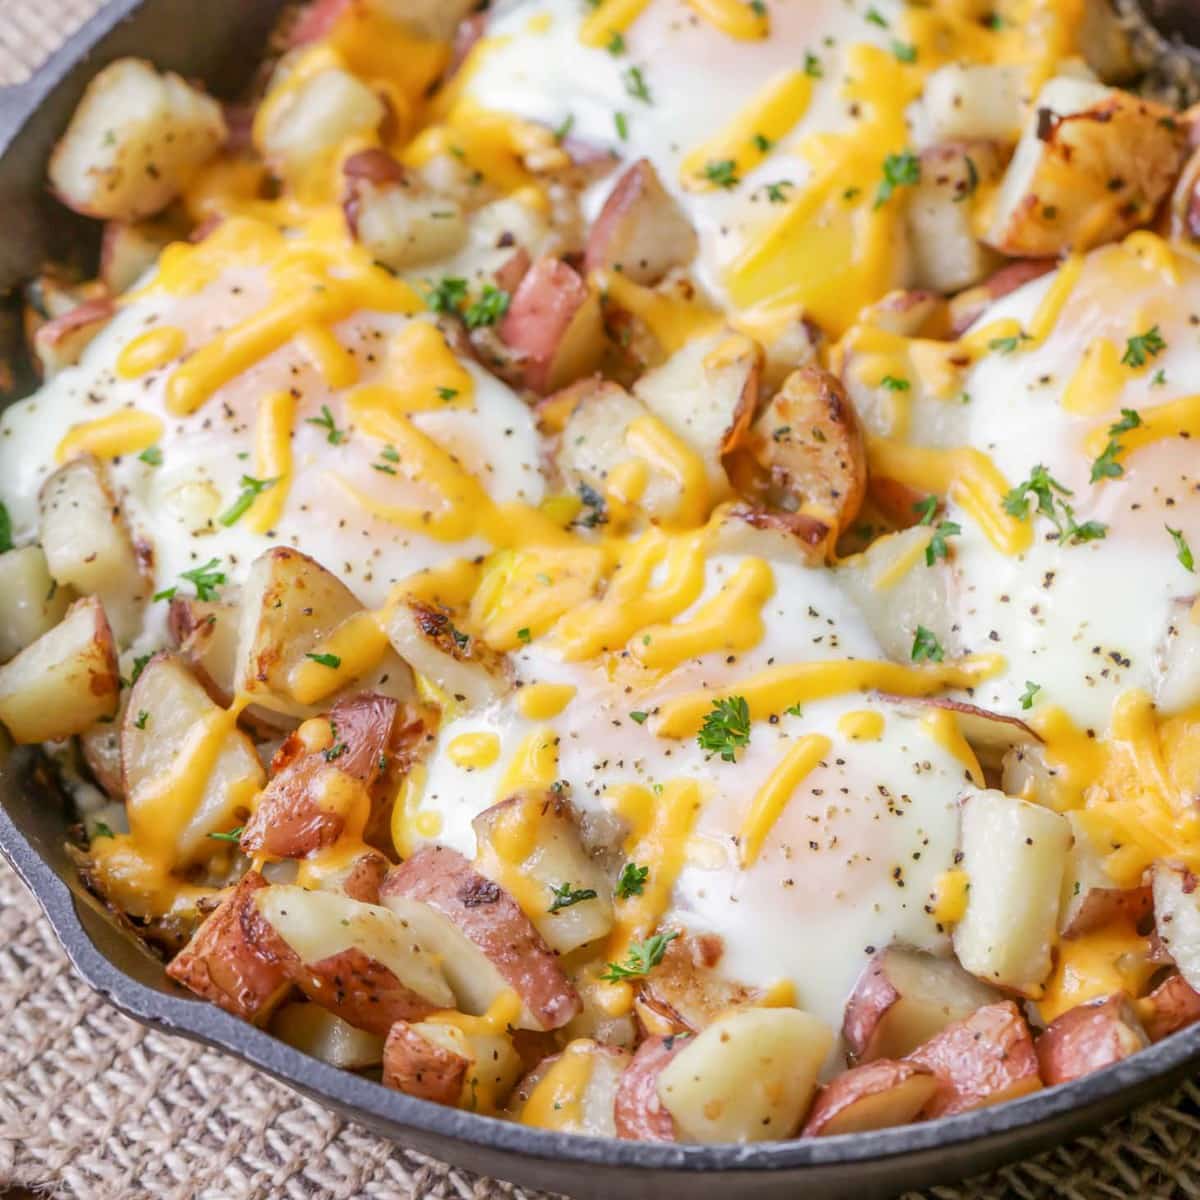 Breakfast for dinner - favorite eggs and potatoes topped with eggs and cheese.